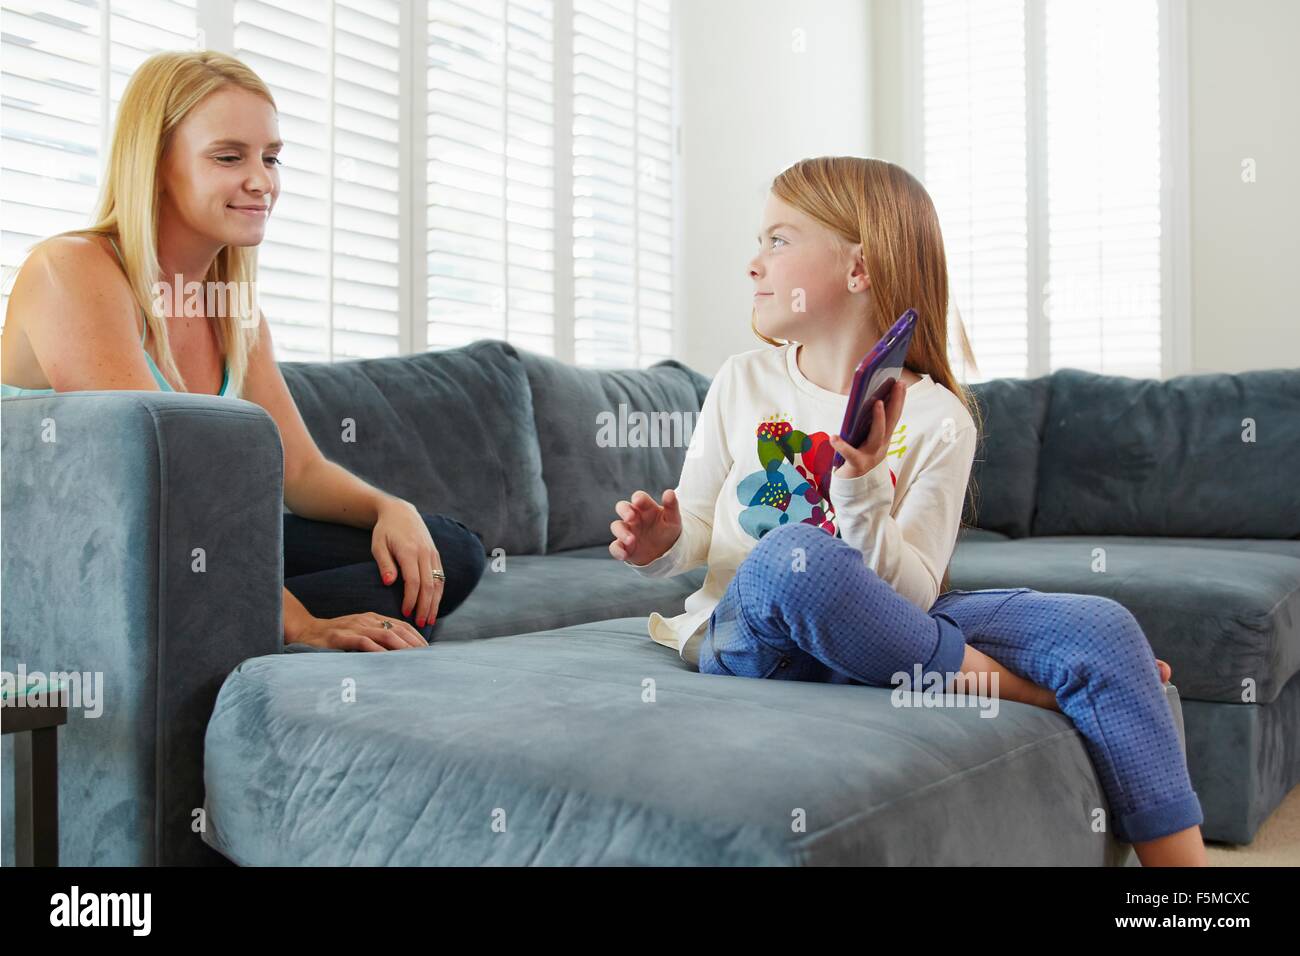 Mother and daughter using digital tablet on sofa in living room Stock Photo